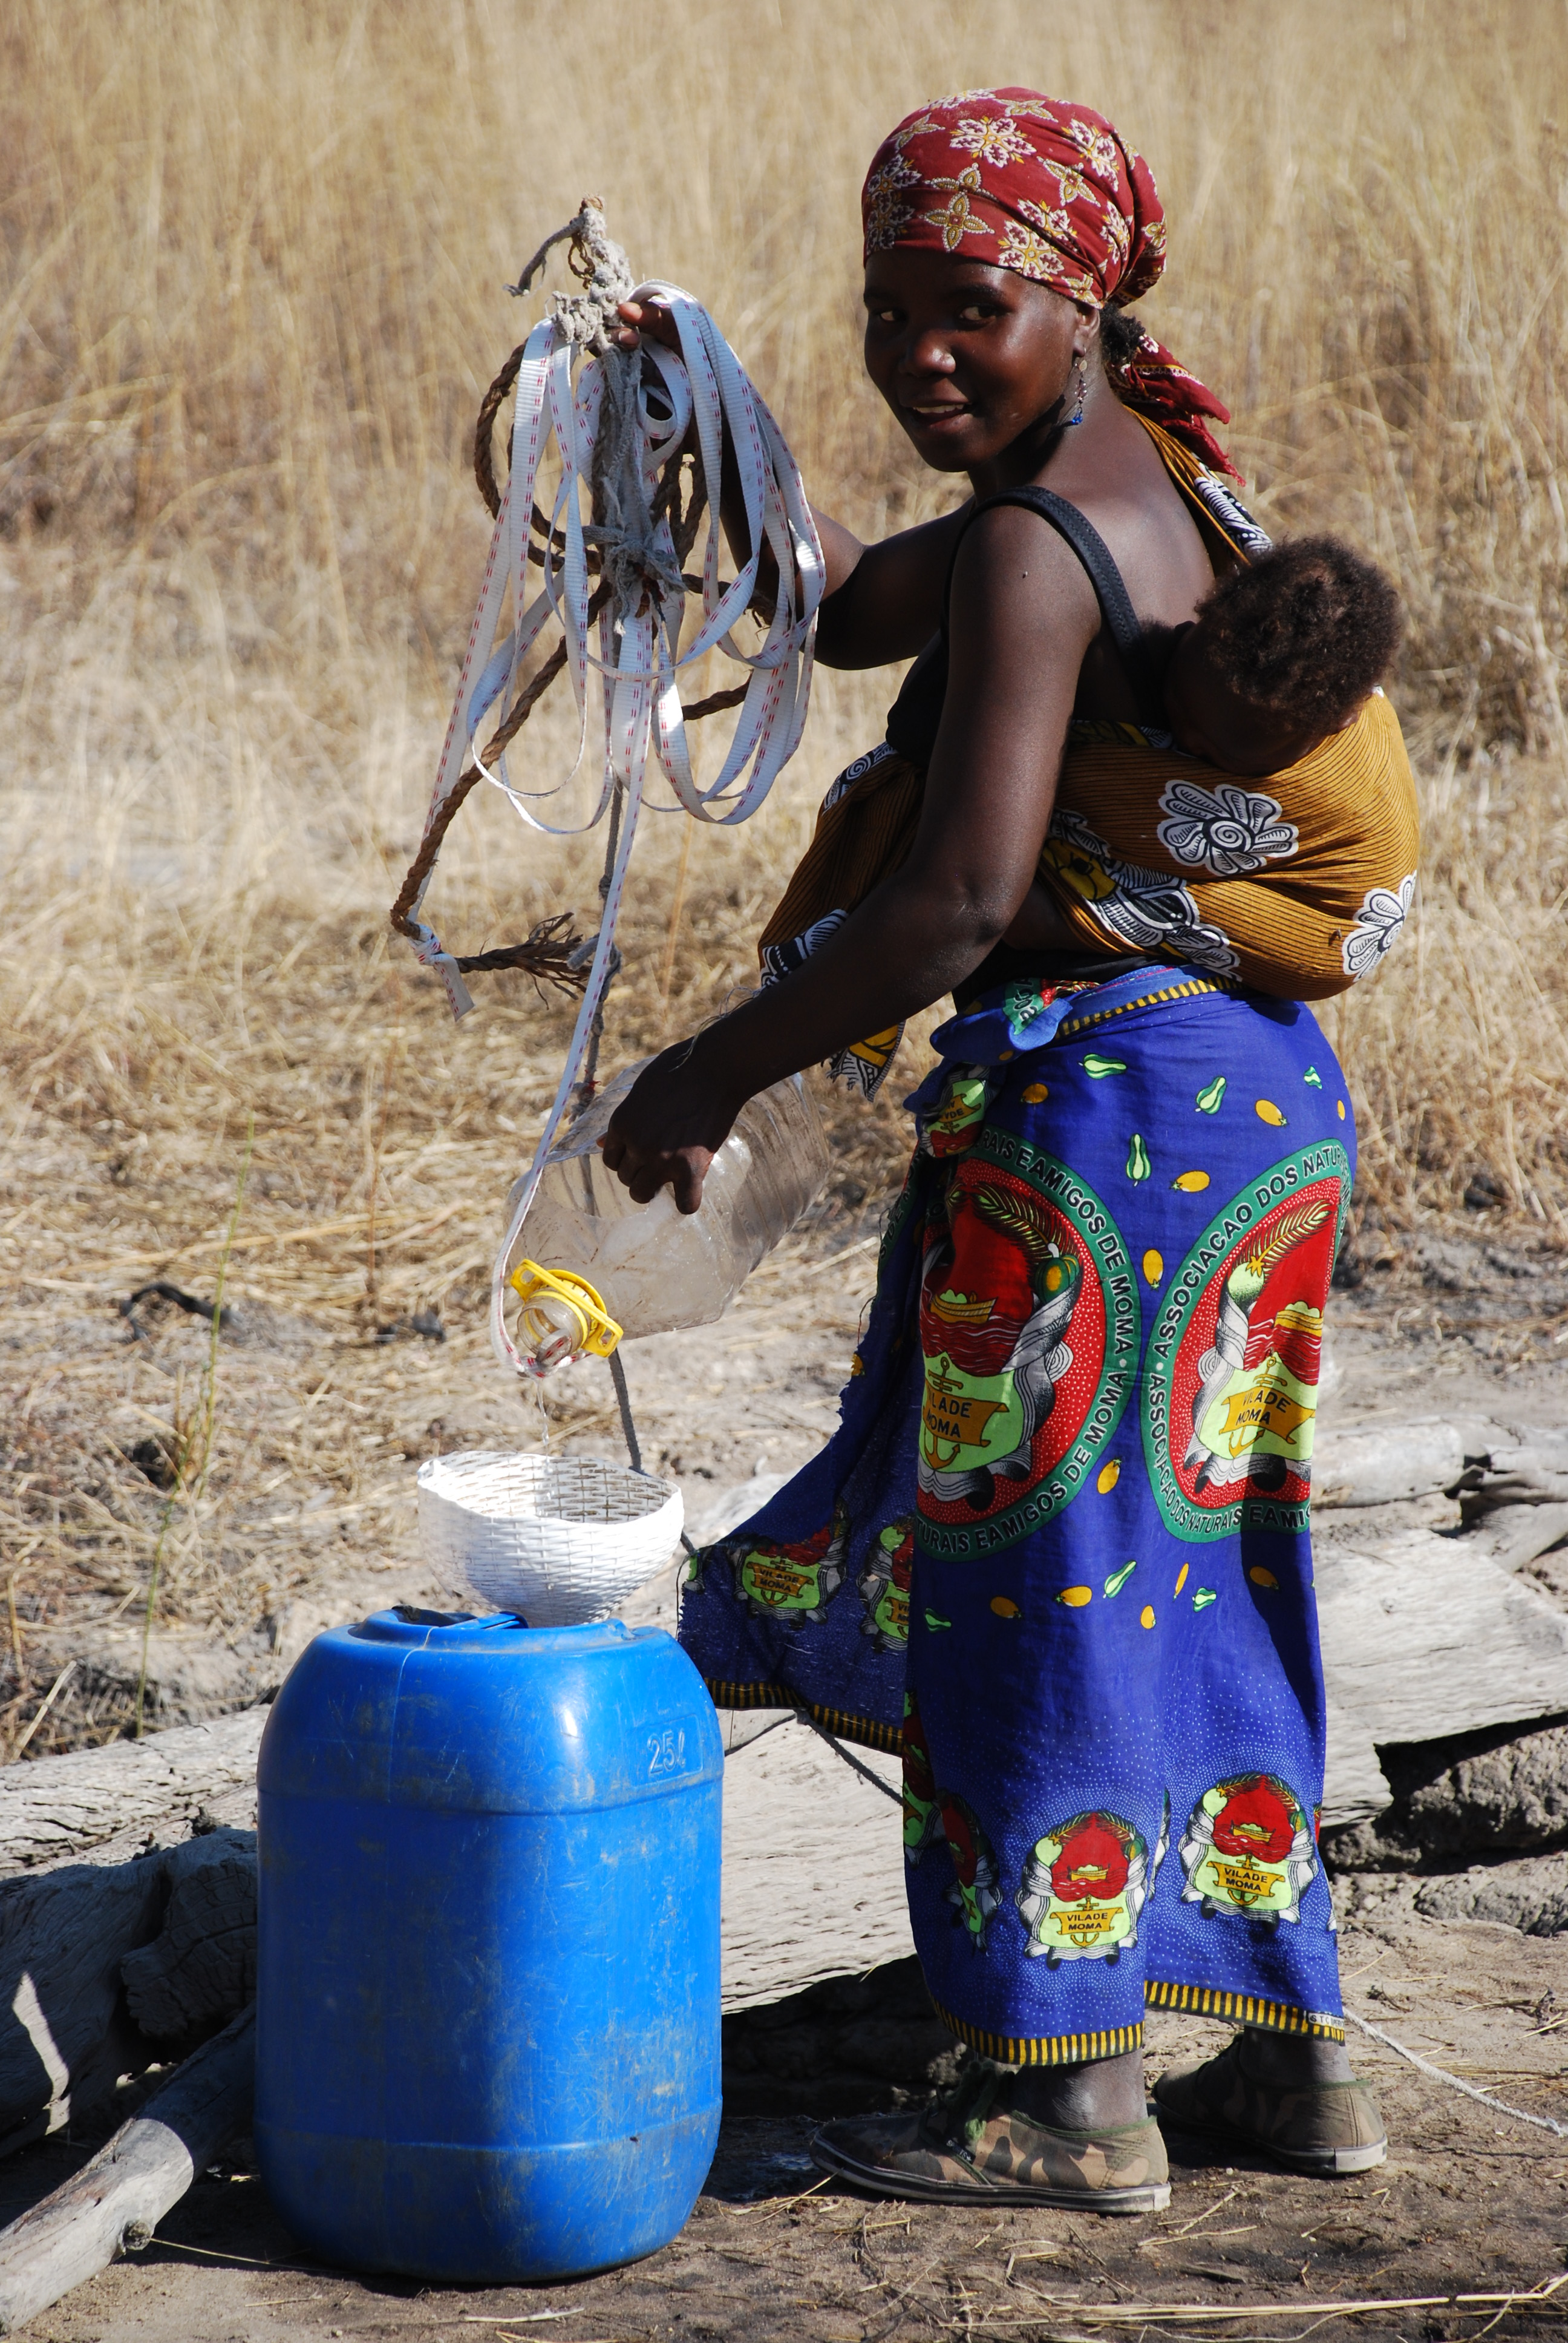 Woman with baby at local water well, Zambia.